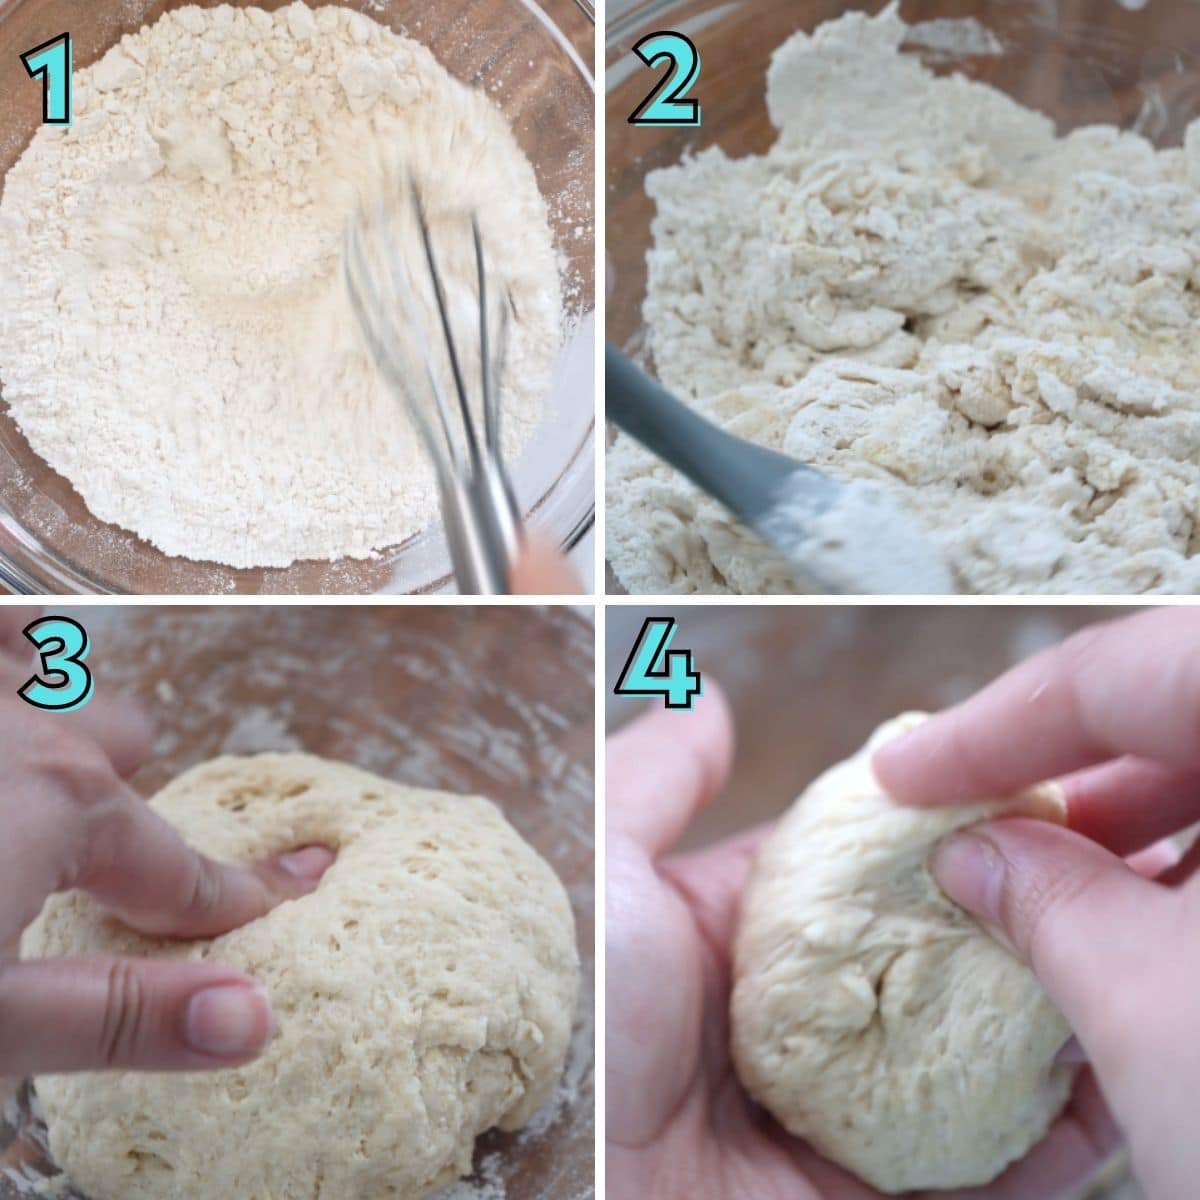 Step by step instructions to prepare tawa naan